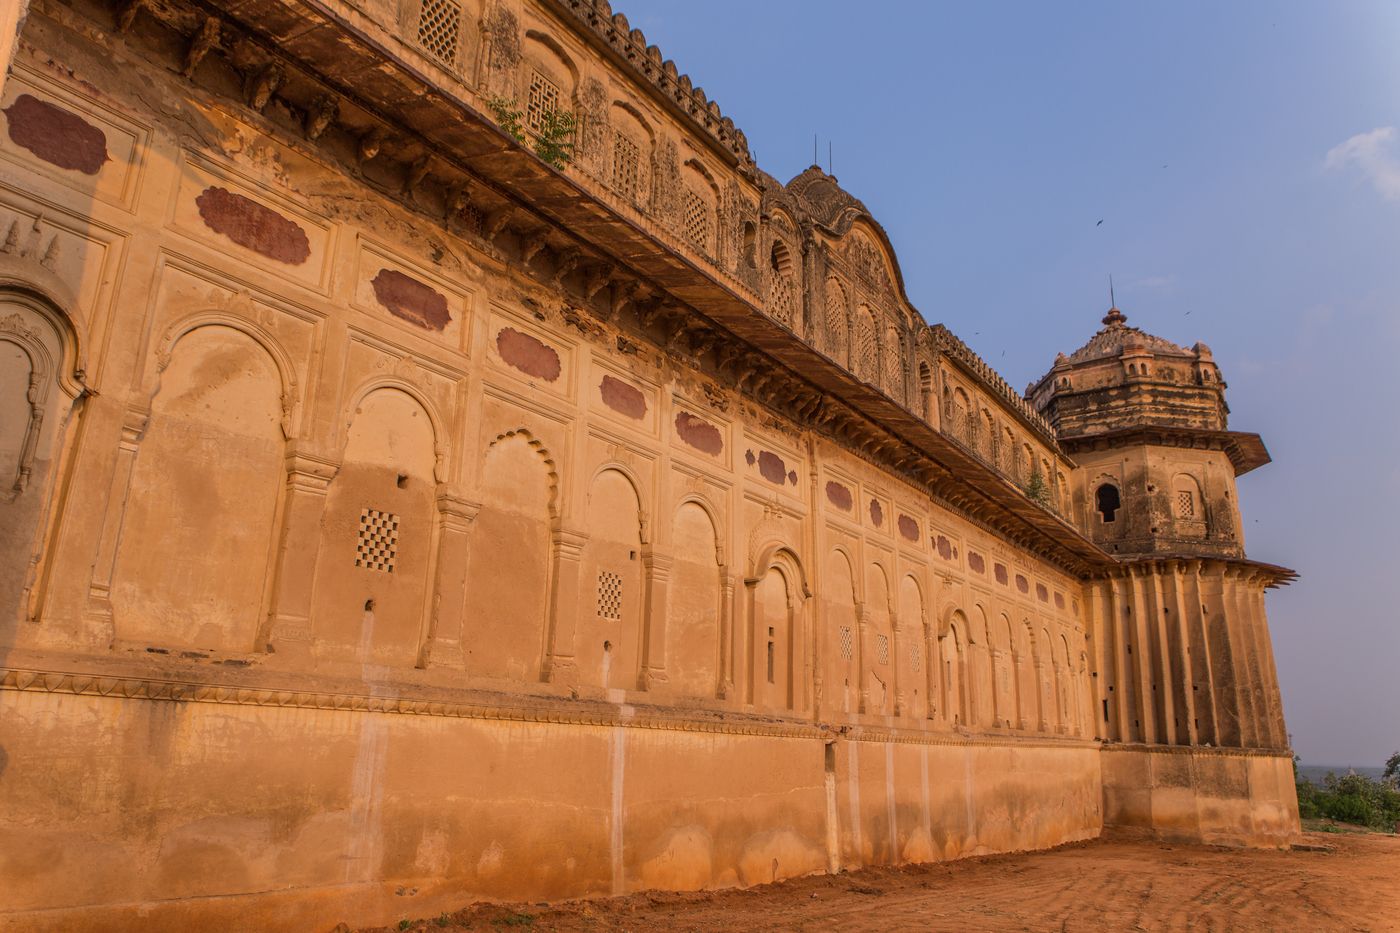 Parapet walls dotted with cannon slots, Orchha 